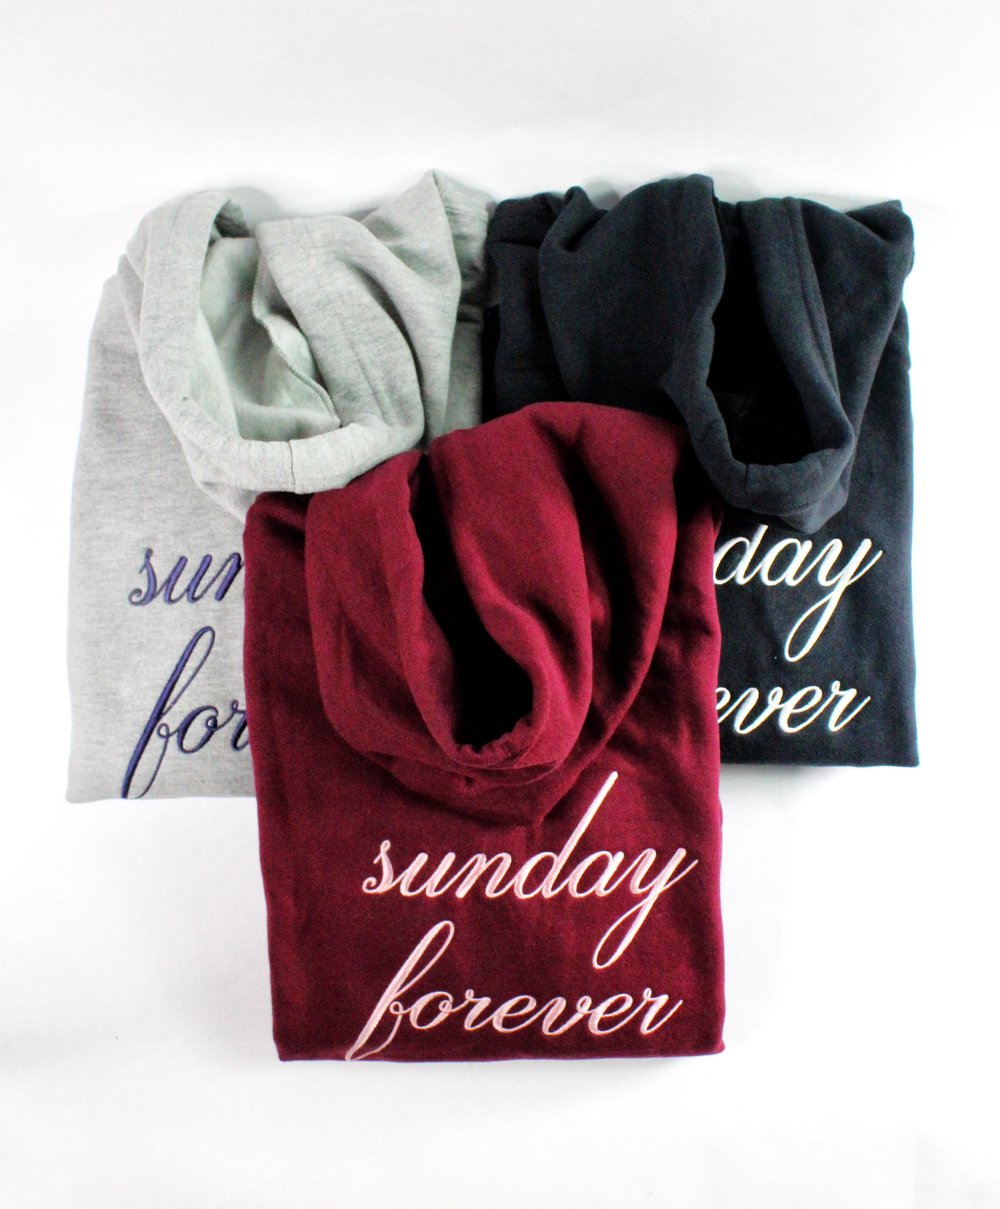 Sunday Forever Hoodie $68